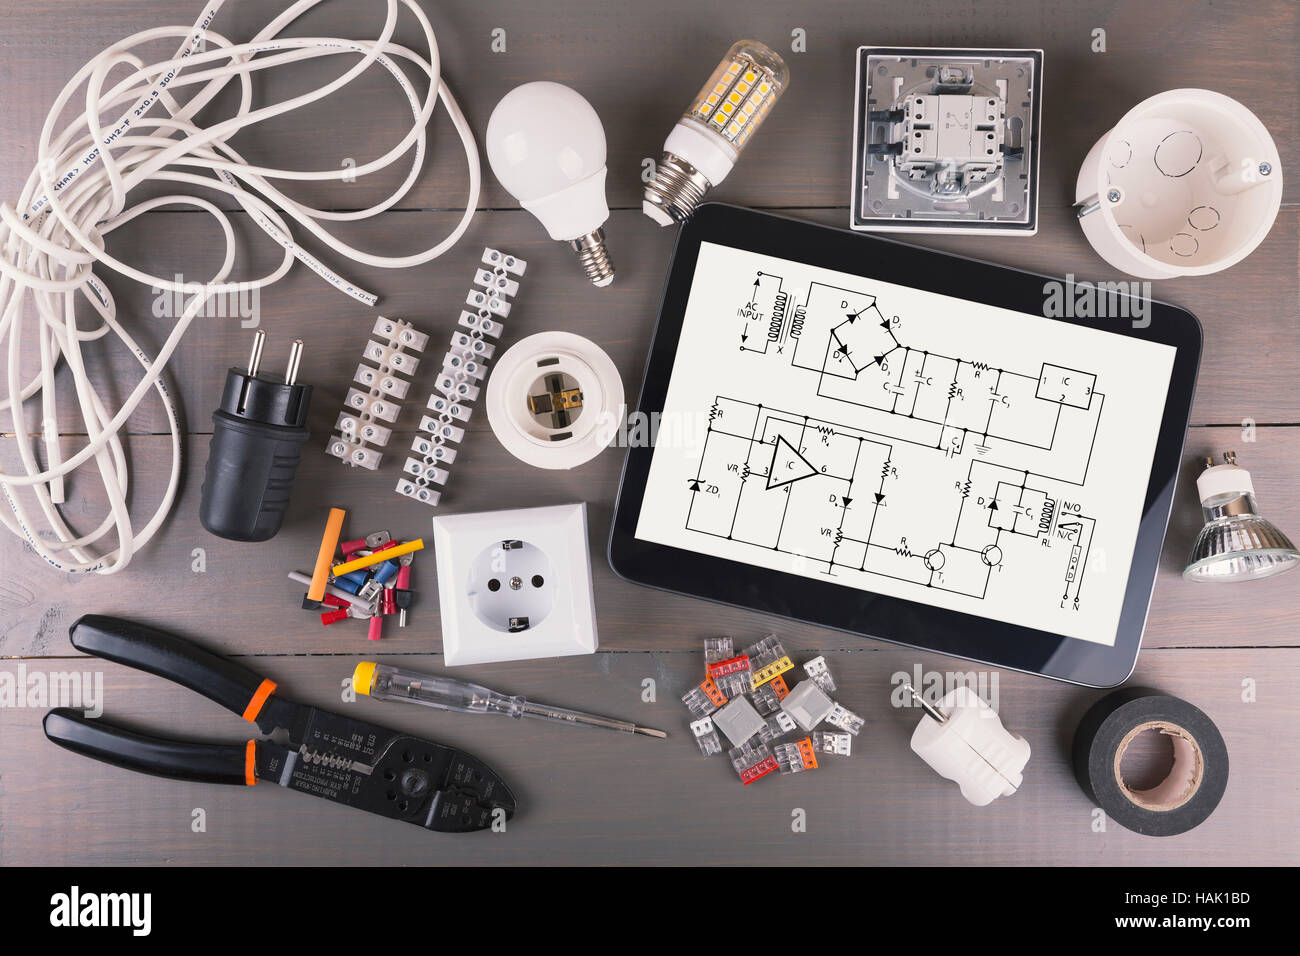 digital tablet with circuit scheme and electrical equipment Stock Photo